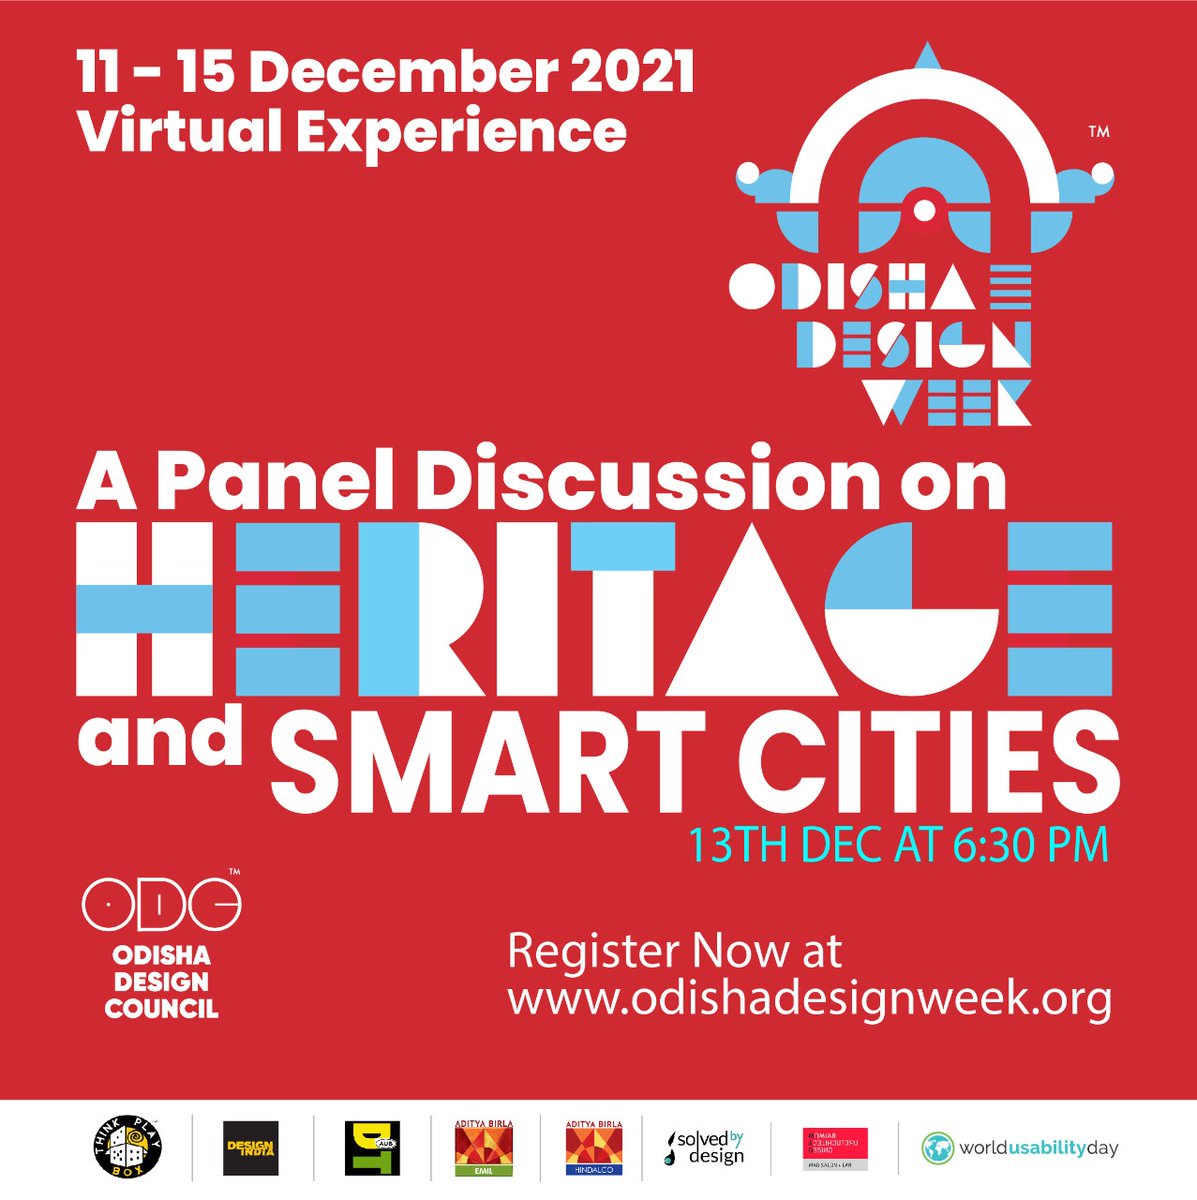 Don't Miss It!
Register here: 
…shadesignweek.odishadesigncouncil.com
@designprovidenc 
#design #designweek #odishadesignweek #Odisha #India #DesignTalk  #odw_2021 #SolvedBydeisgn #smartcities #heritage